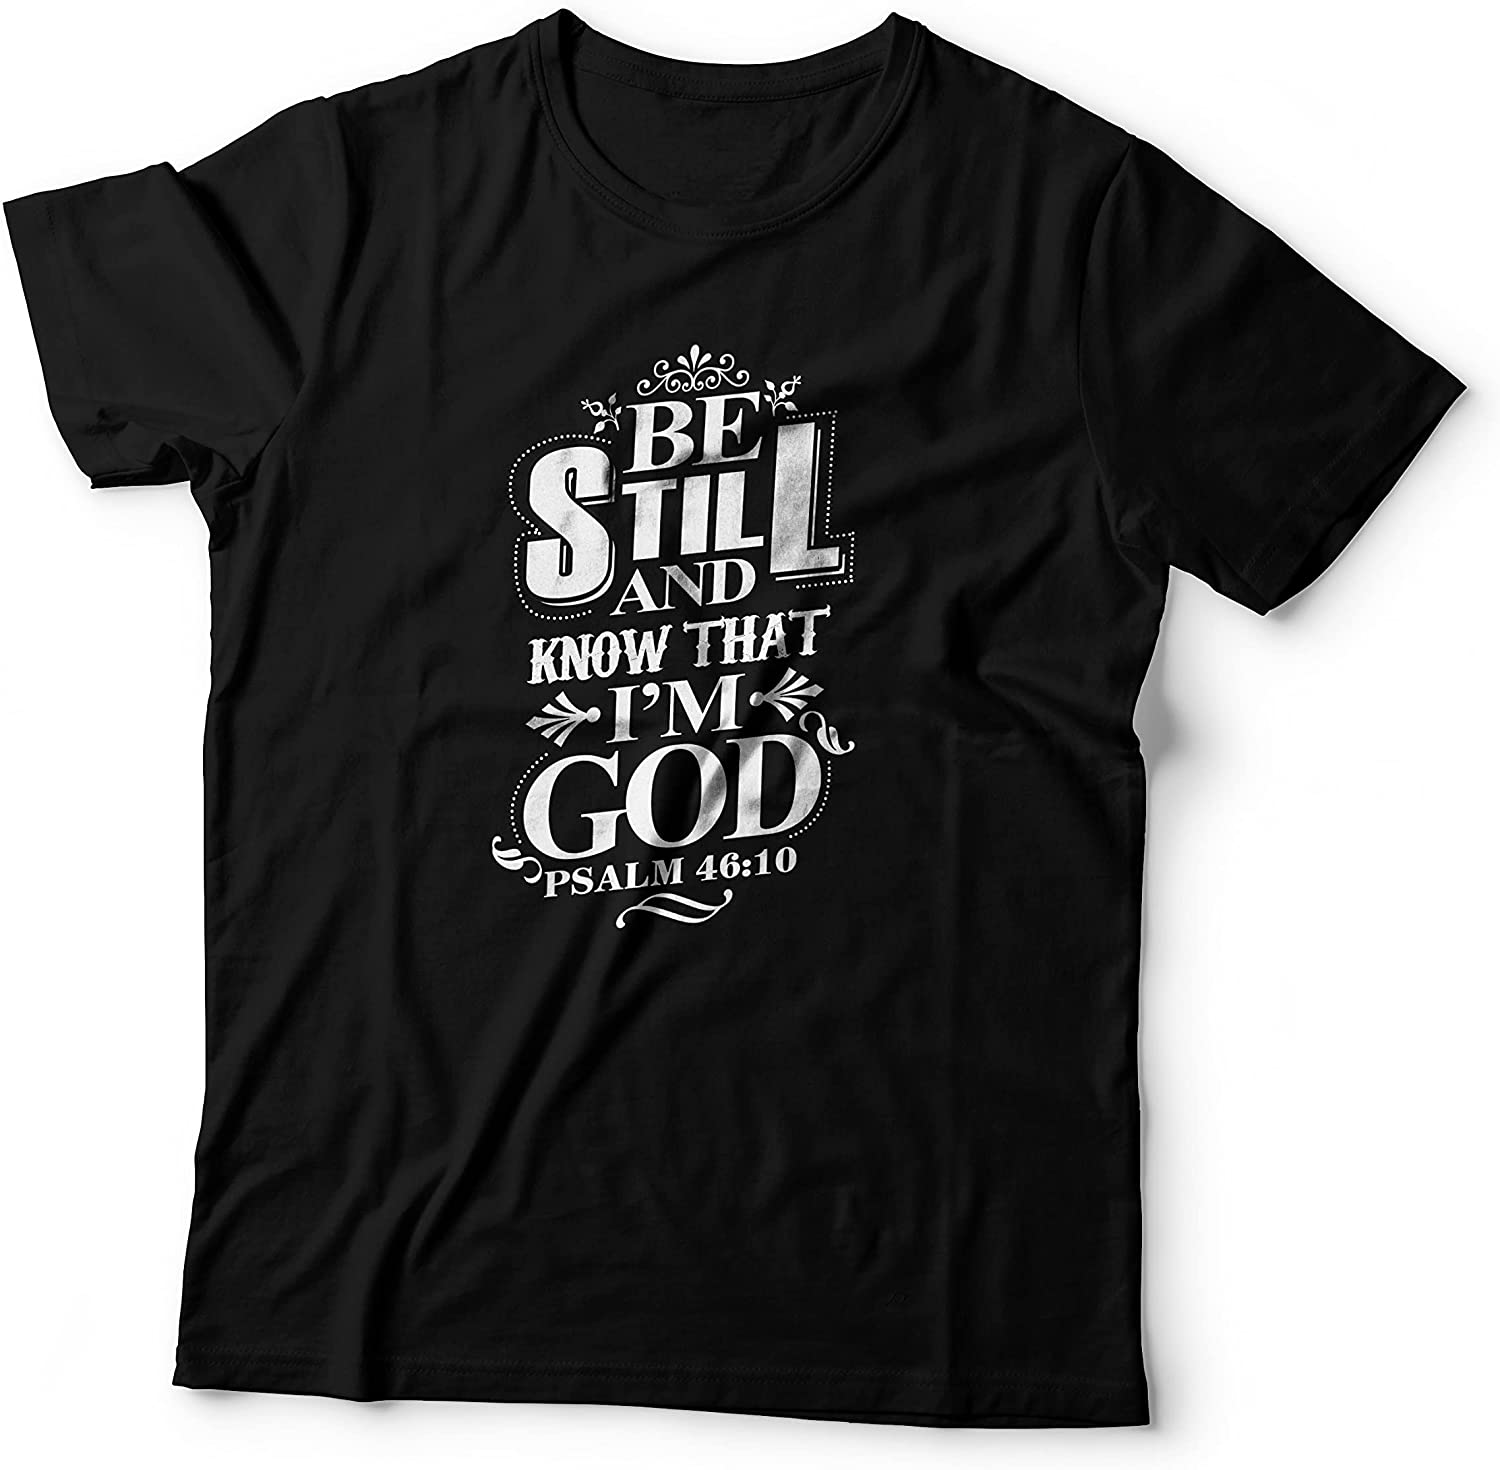 Be Still and Know That I am God Psalm 46-10 T-Shirt Black-4XLarge